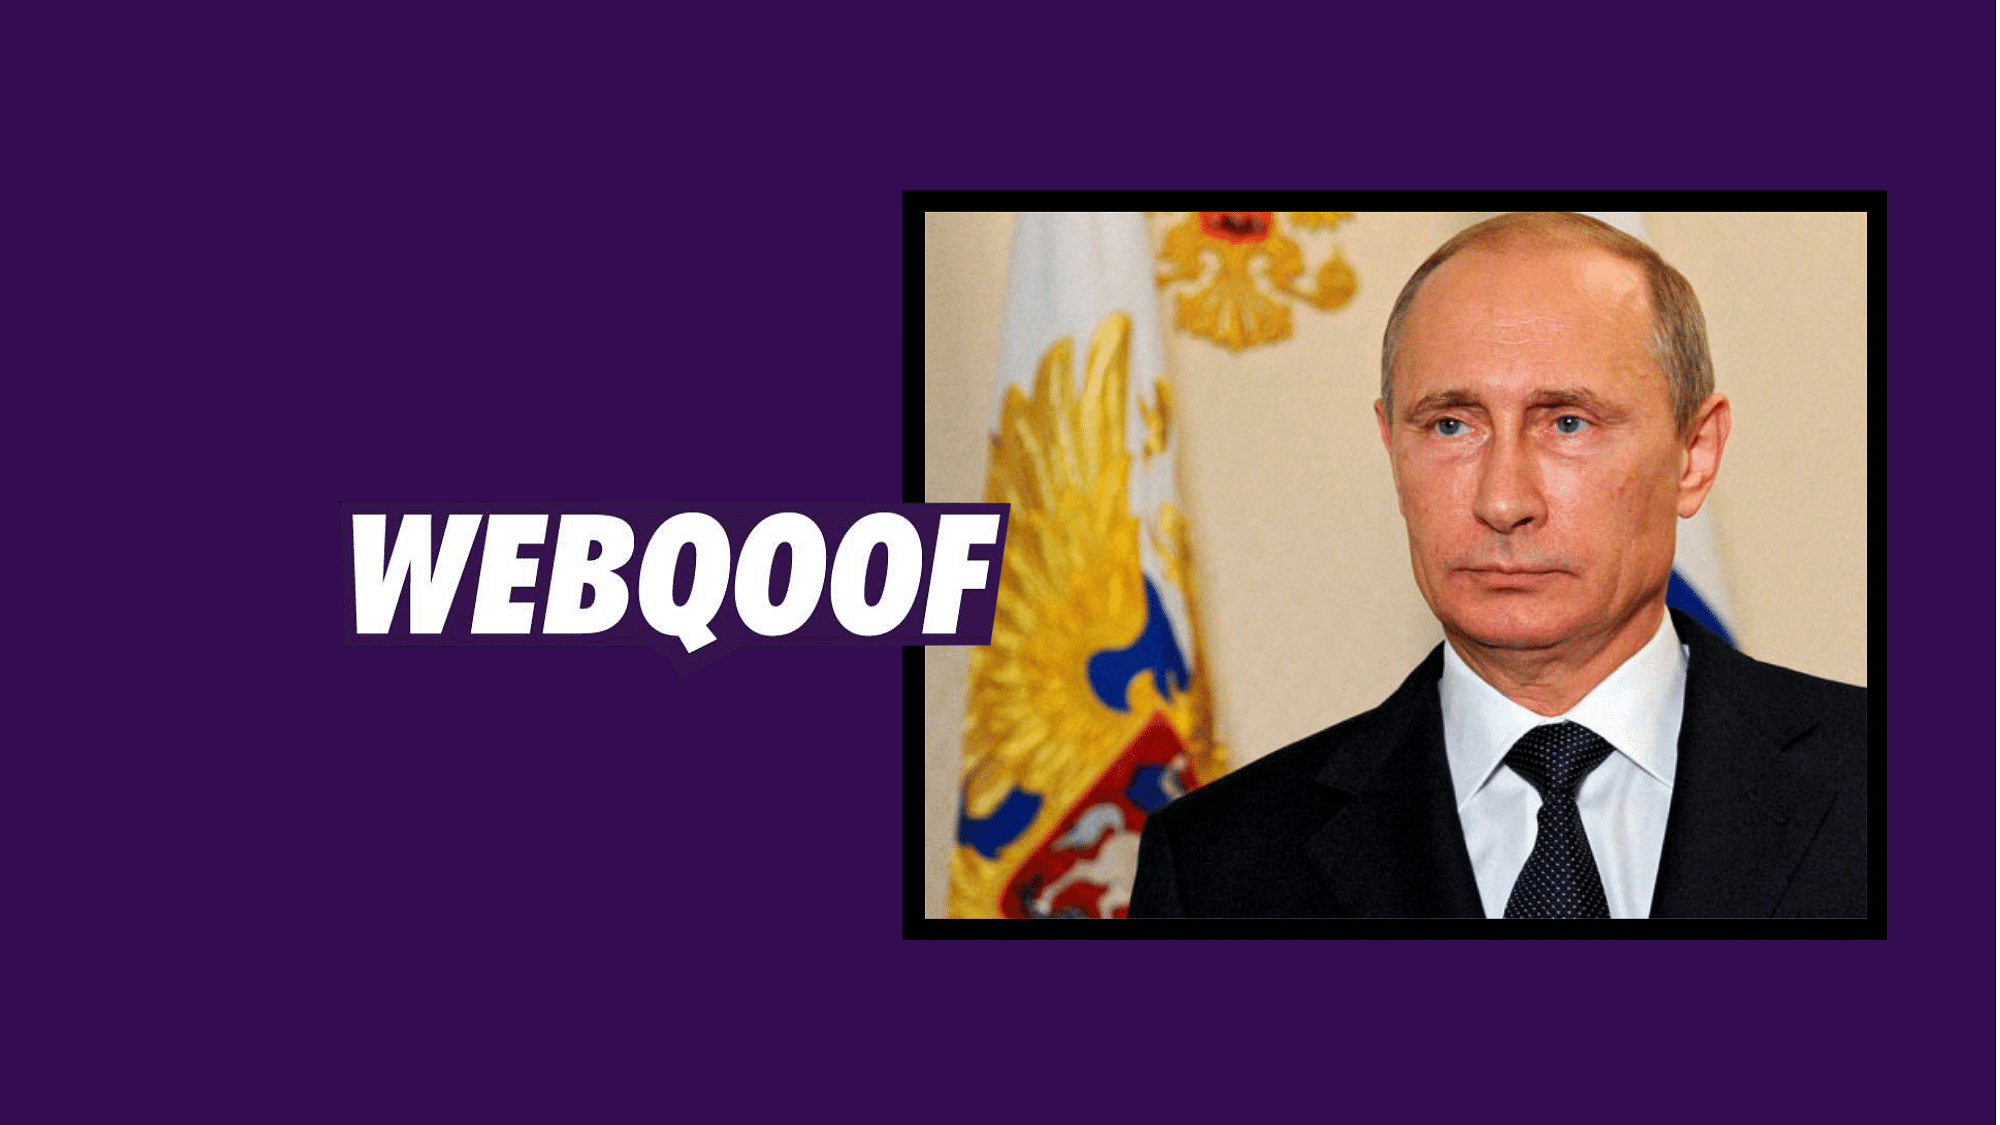 A message, which claims to be a speech delivered by Vladimir Putin has been circulating on social media.